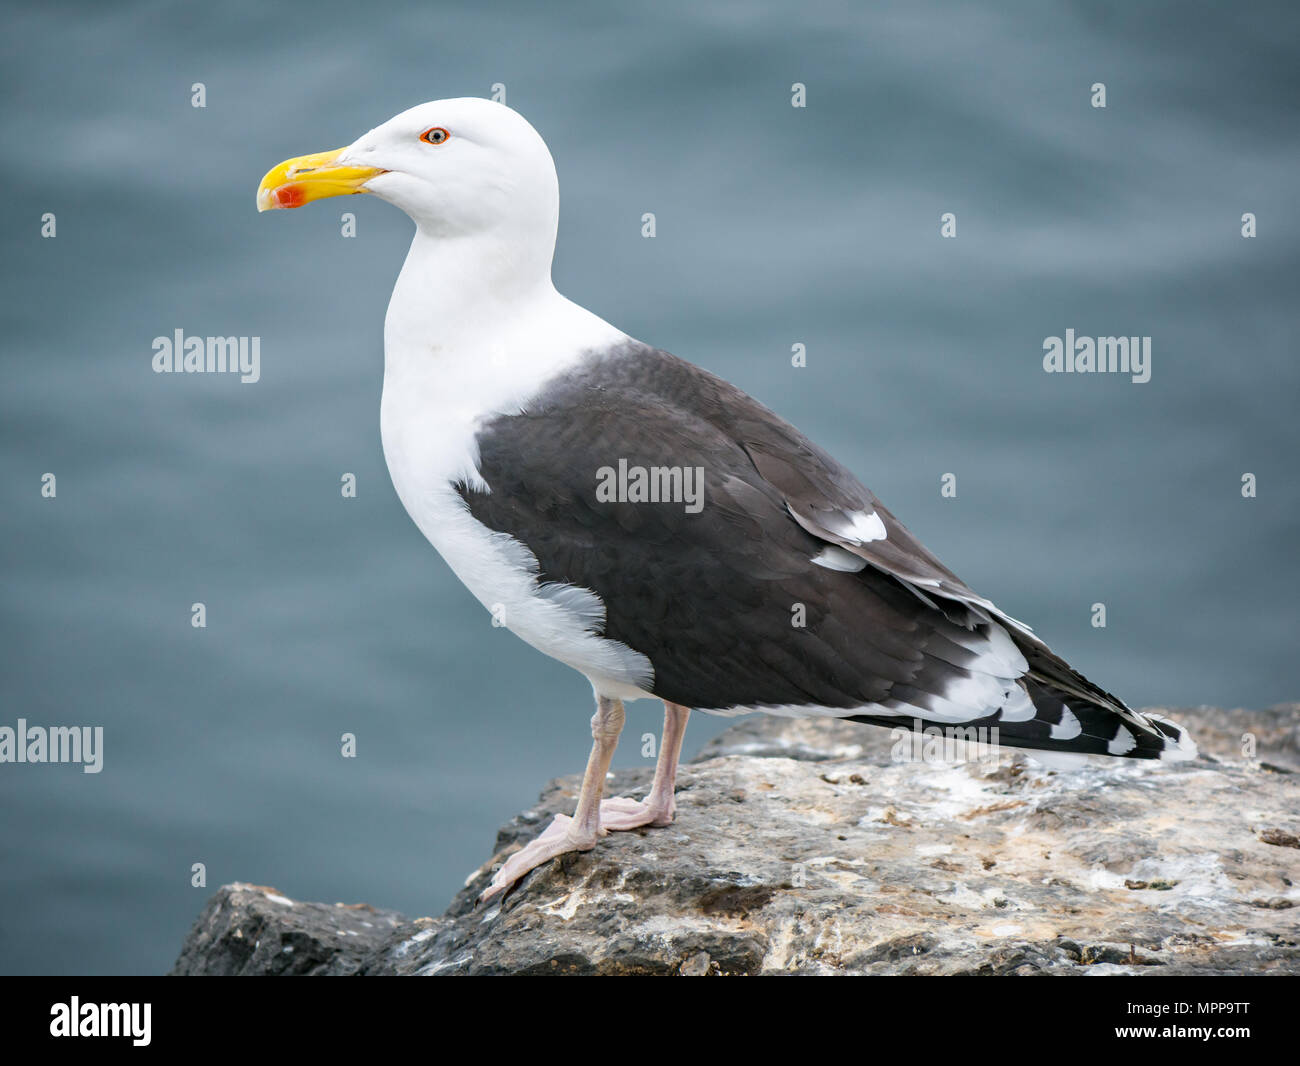 Craigleith Island, 24 May 2018. Firth of Forth, Scotland, UK. Close up of great black-backed gull, Larus marinus, on a rocky ledge with smooth sea water in background Stock Photo